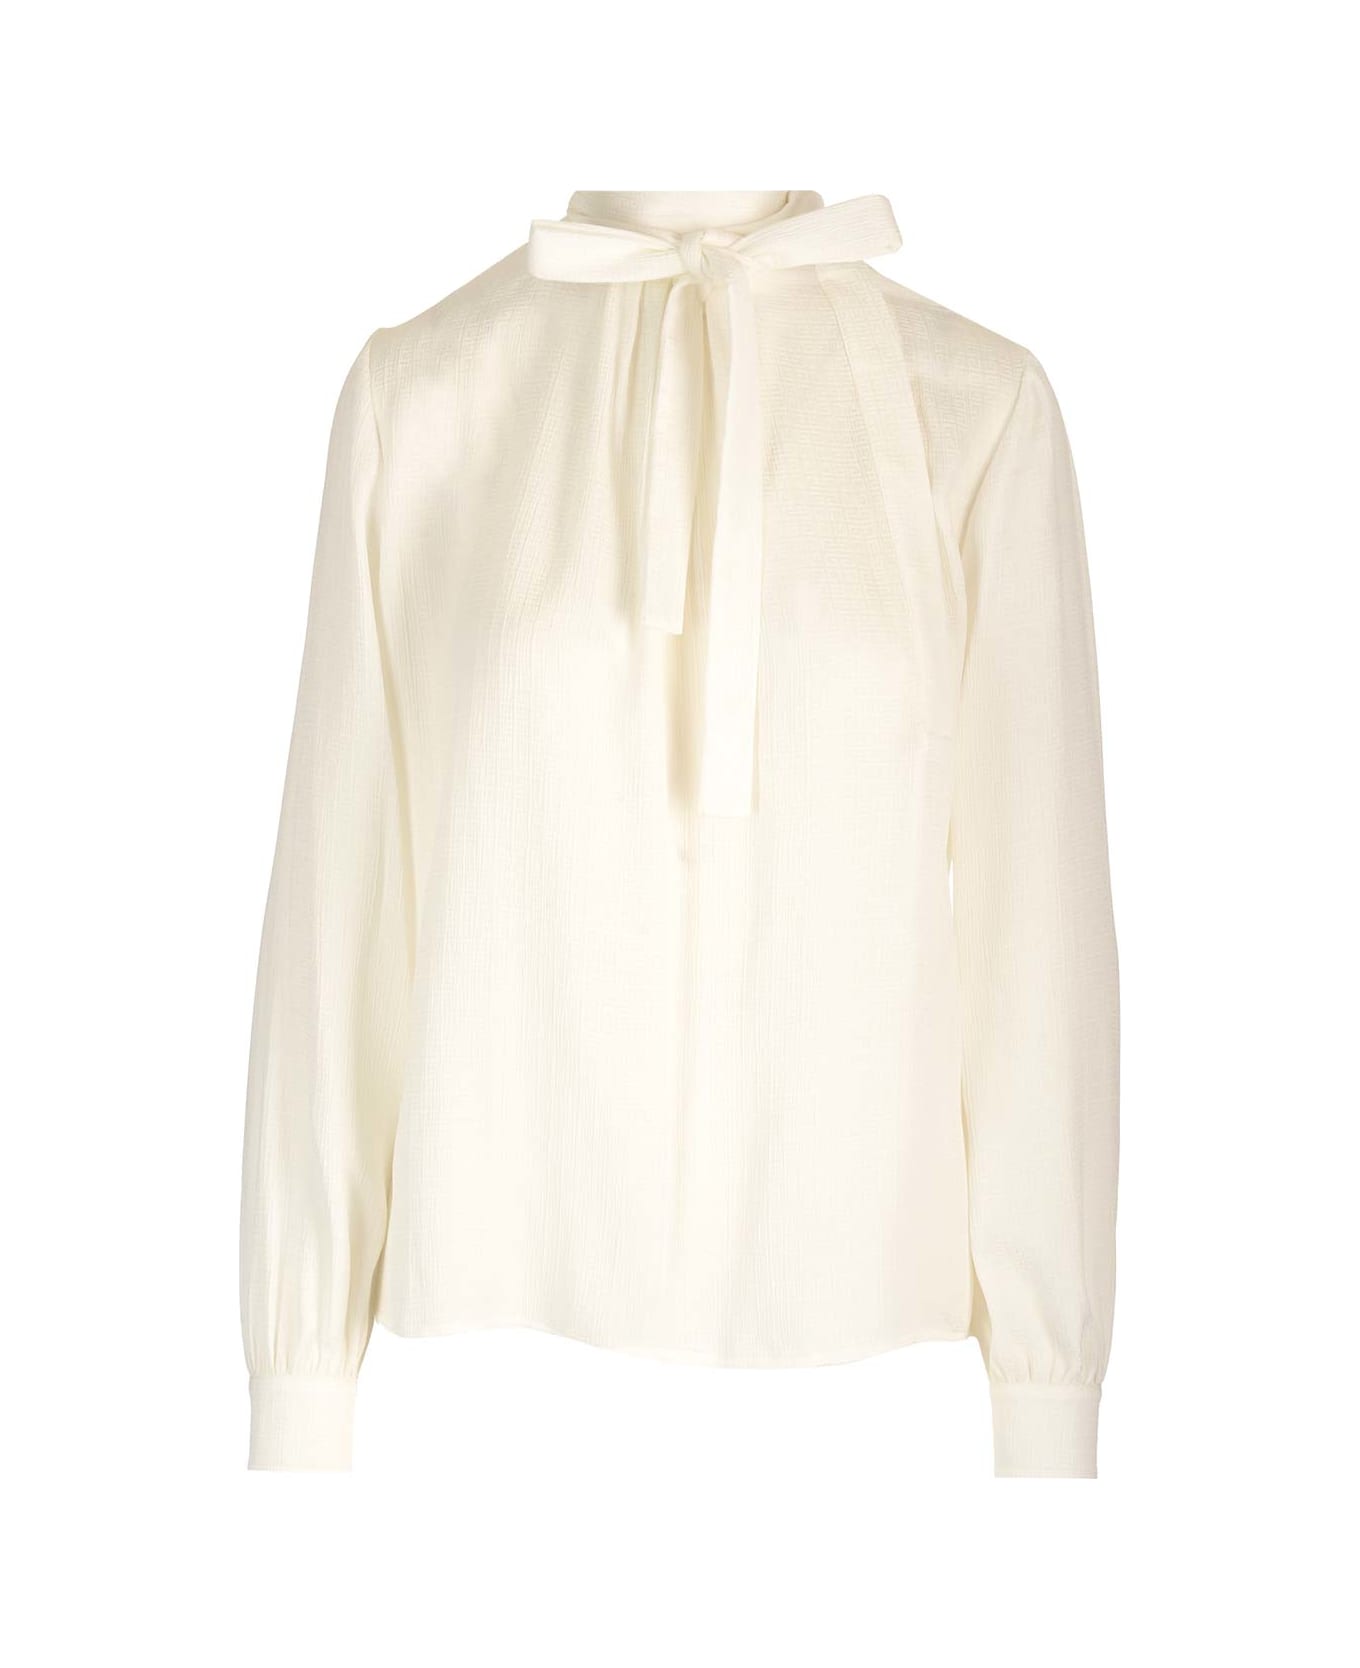 Givenchy Silk Shirt With Lavallière Collar - White